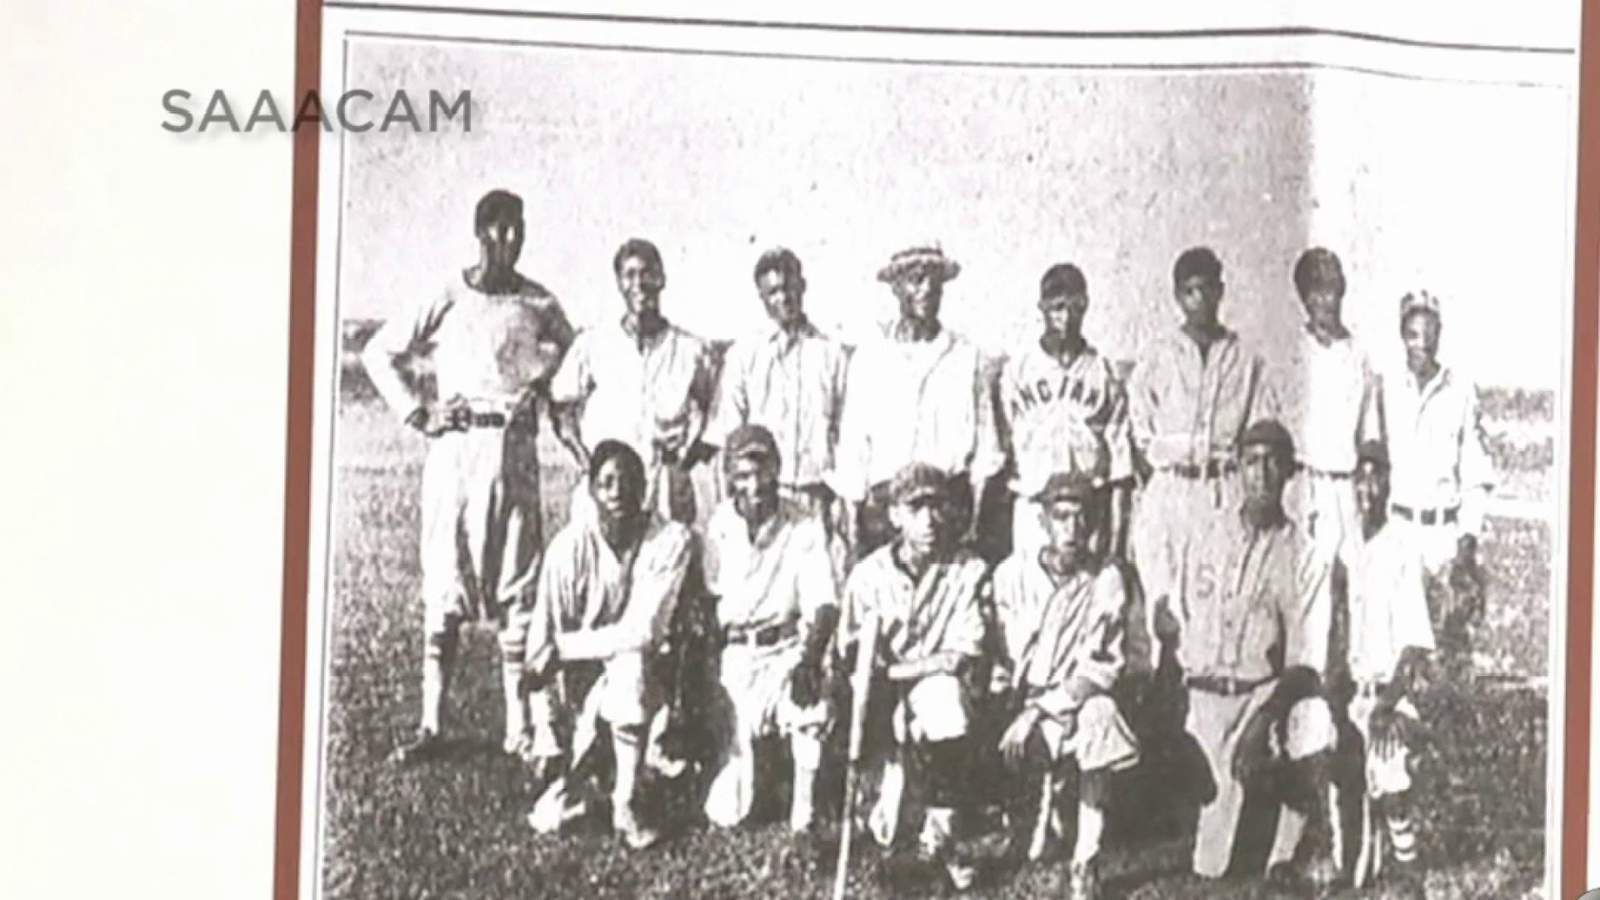 South Texas Negro League baseball featured local talent who created legacy on East Side